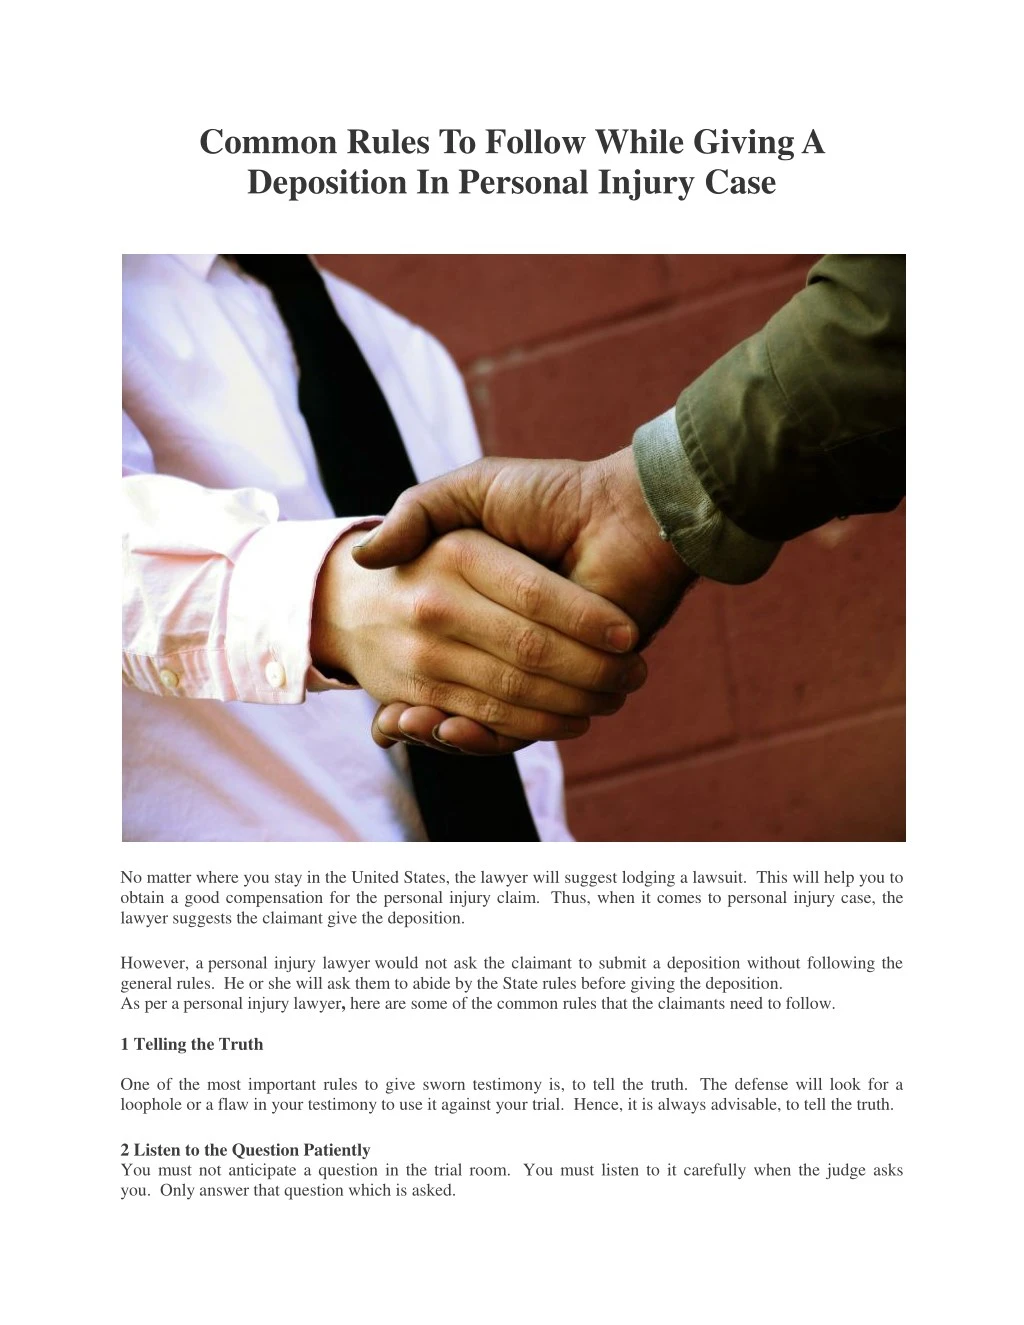 common rules to follow while giving a deposition